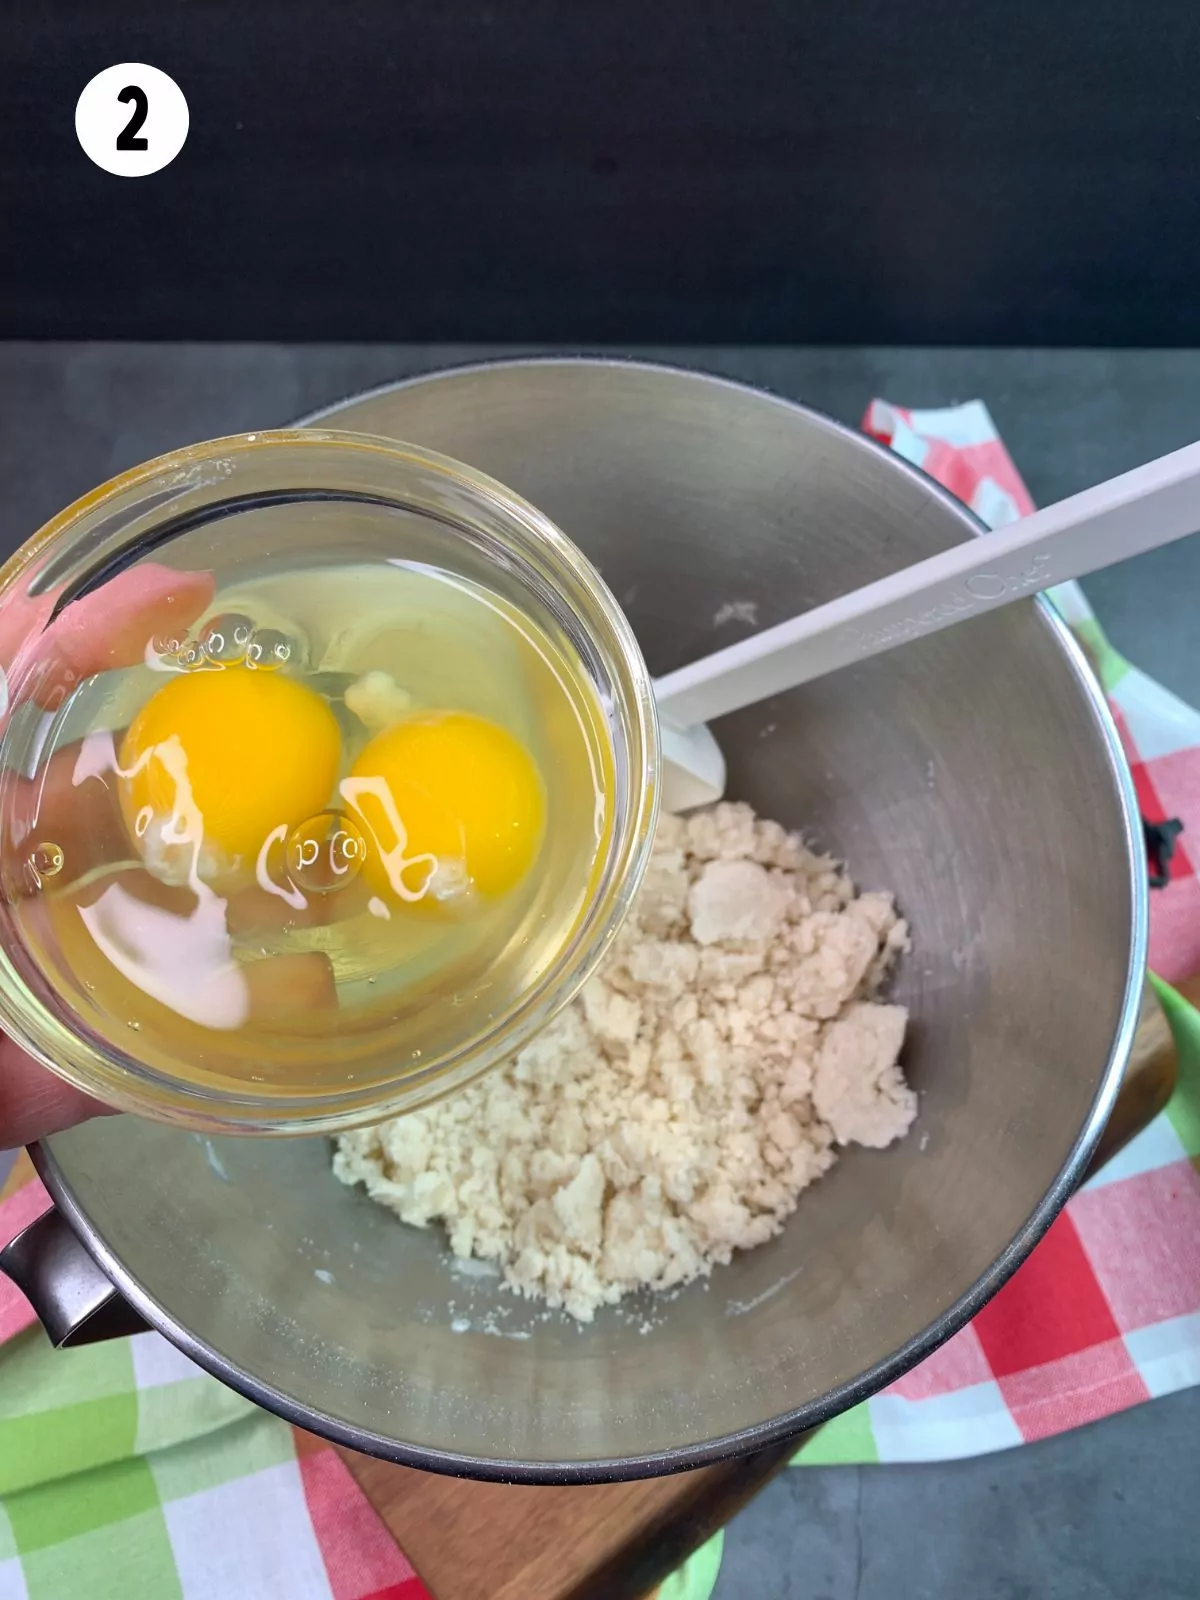 Add eggs to cake mix in bowl.